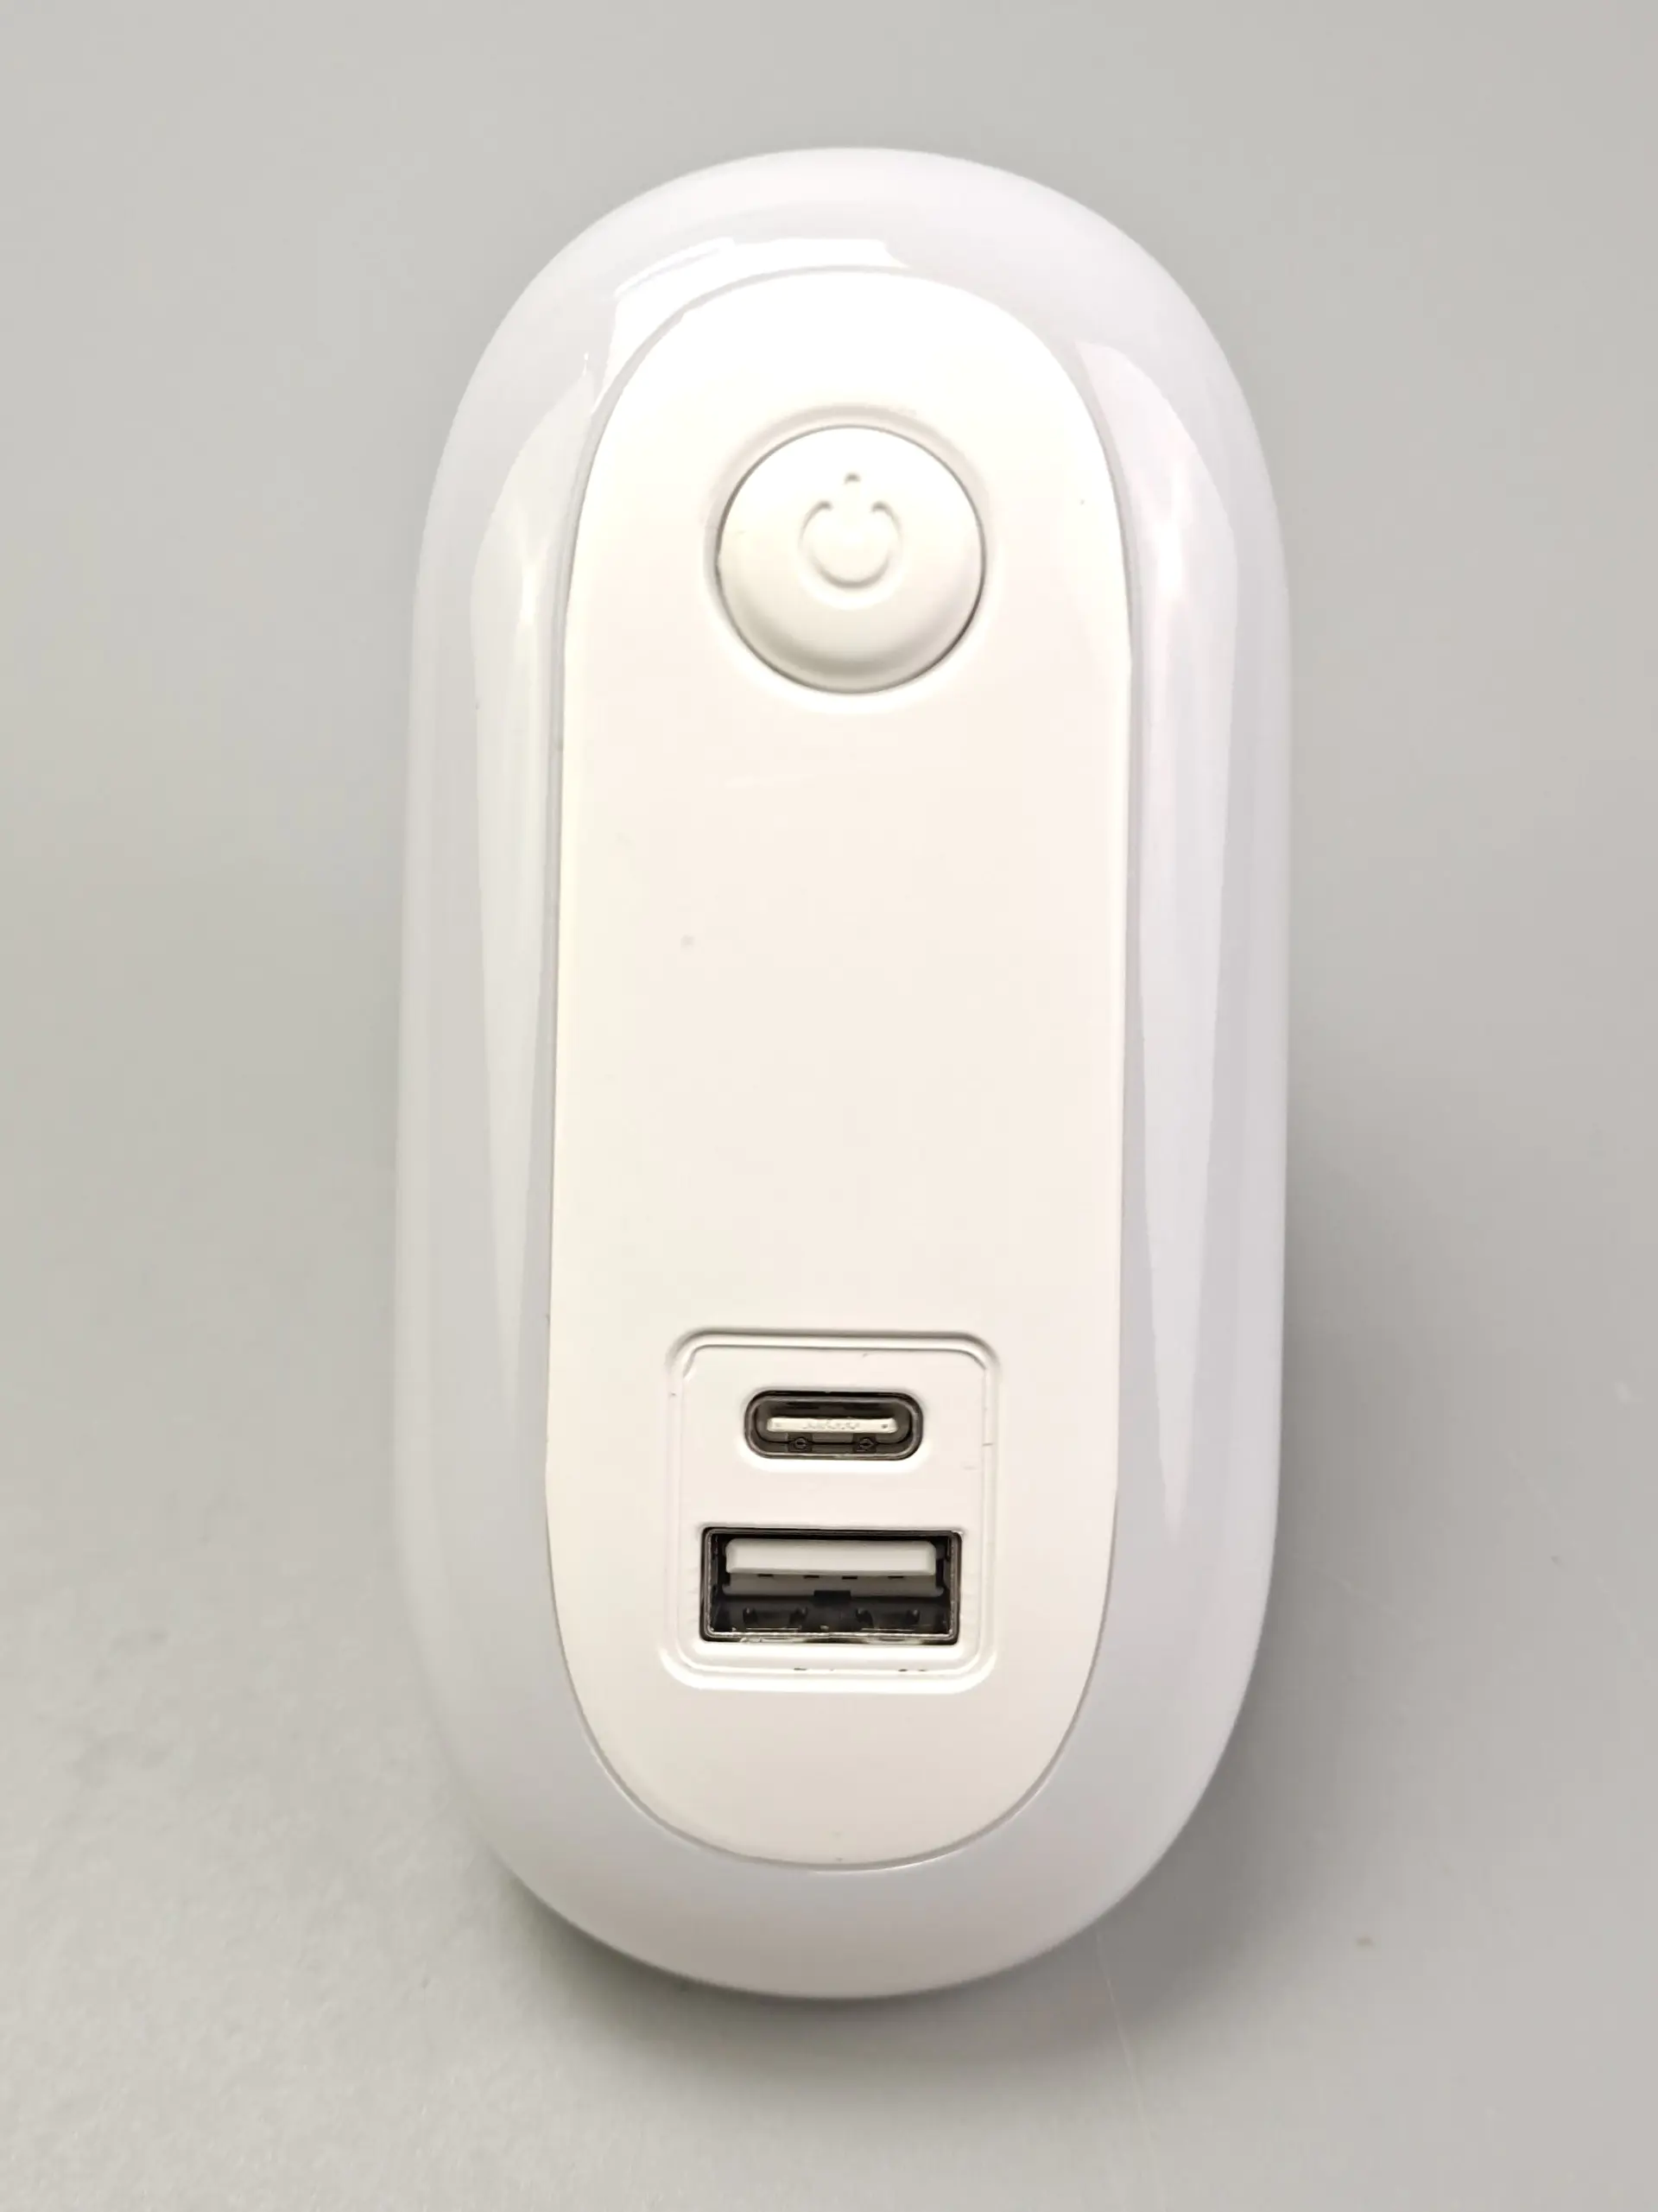 A94T USB+Type-c Charger LED Night Light Touch Sensor lamp with tricolor dimming function Output 5V 2.1A